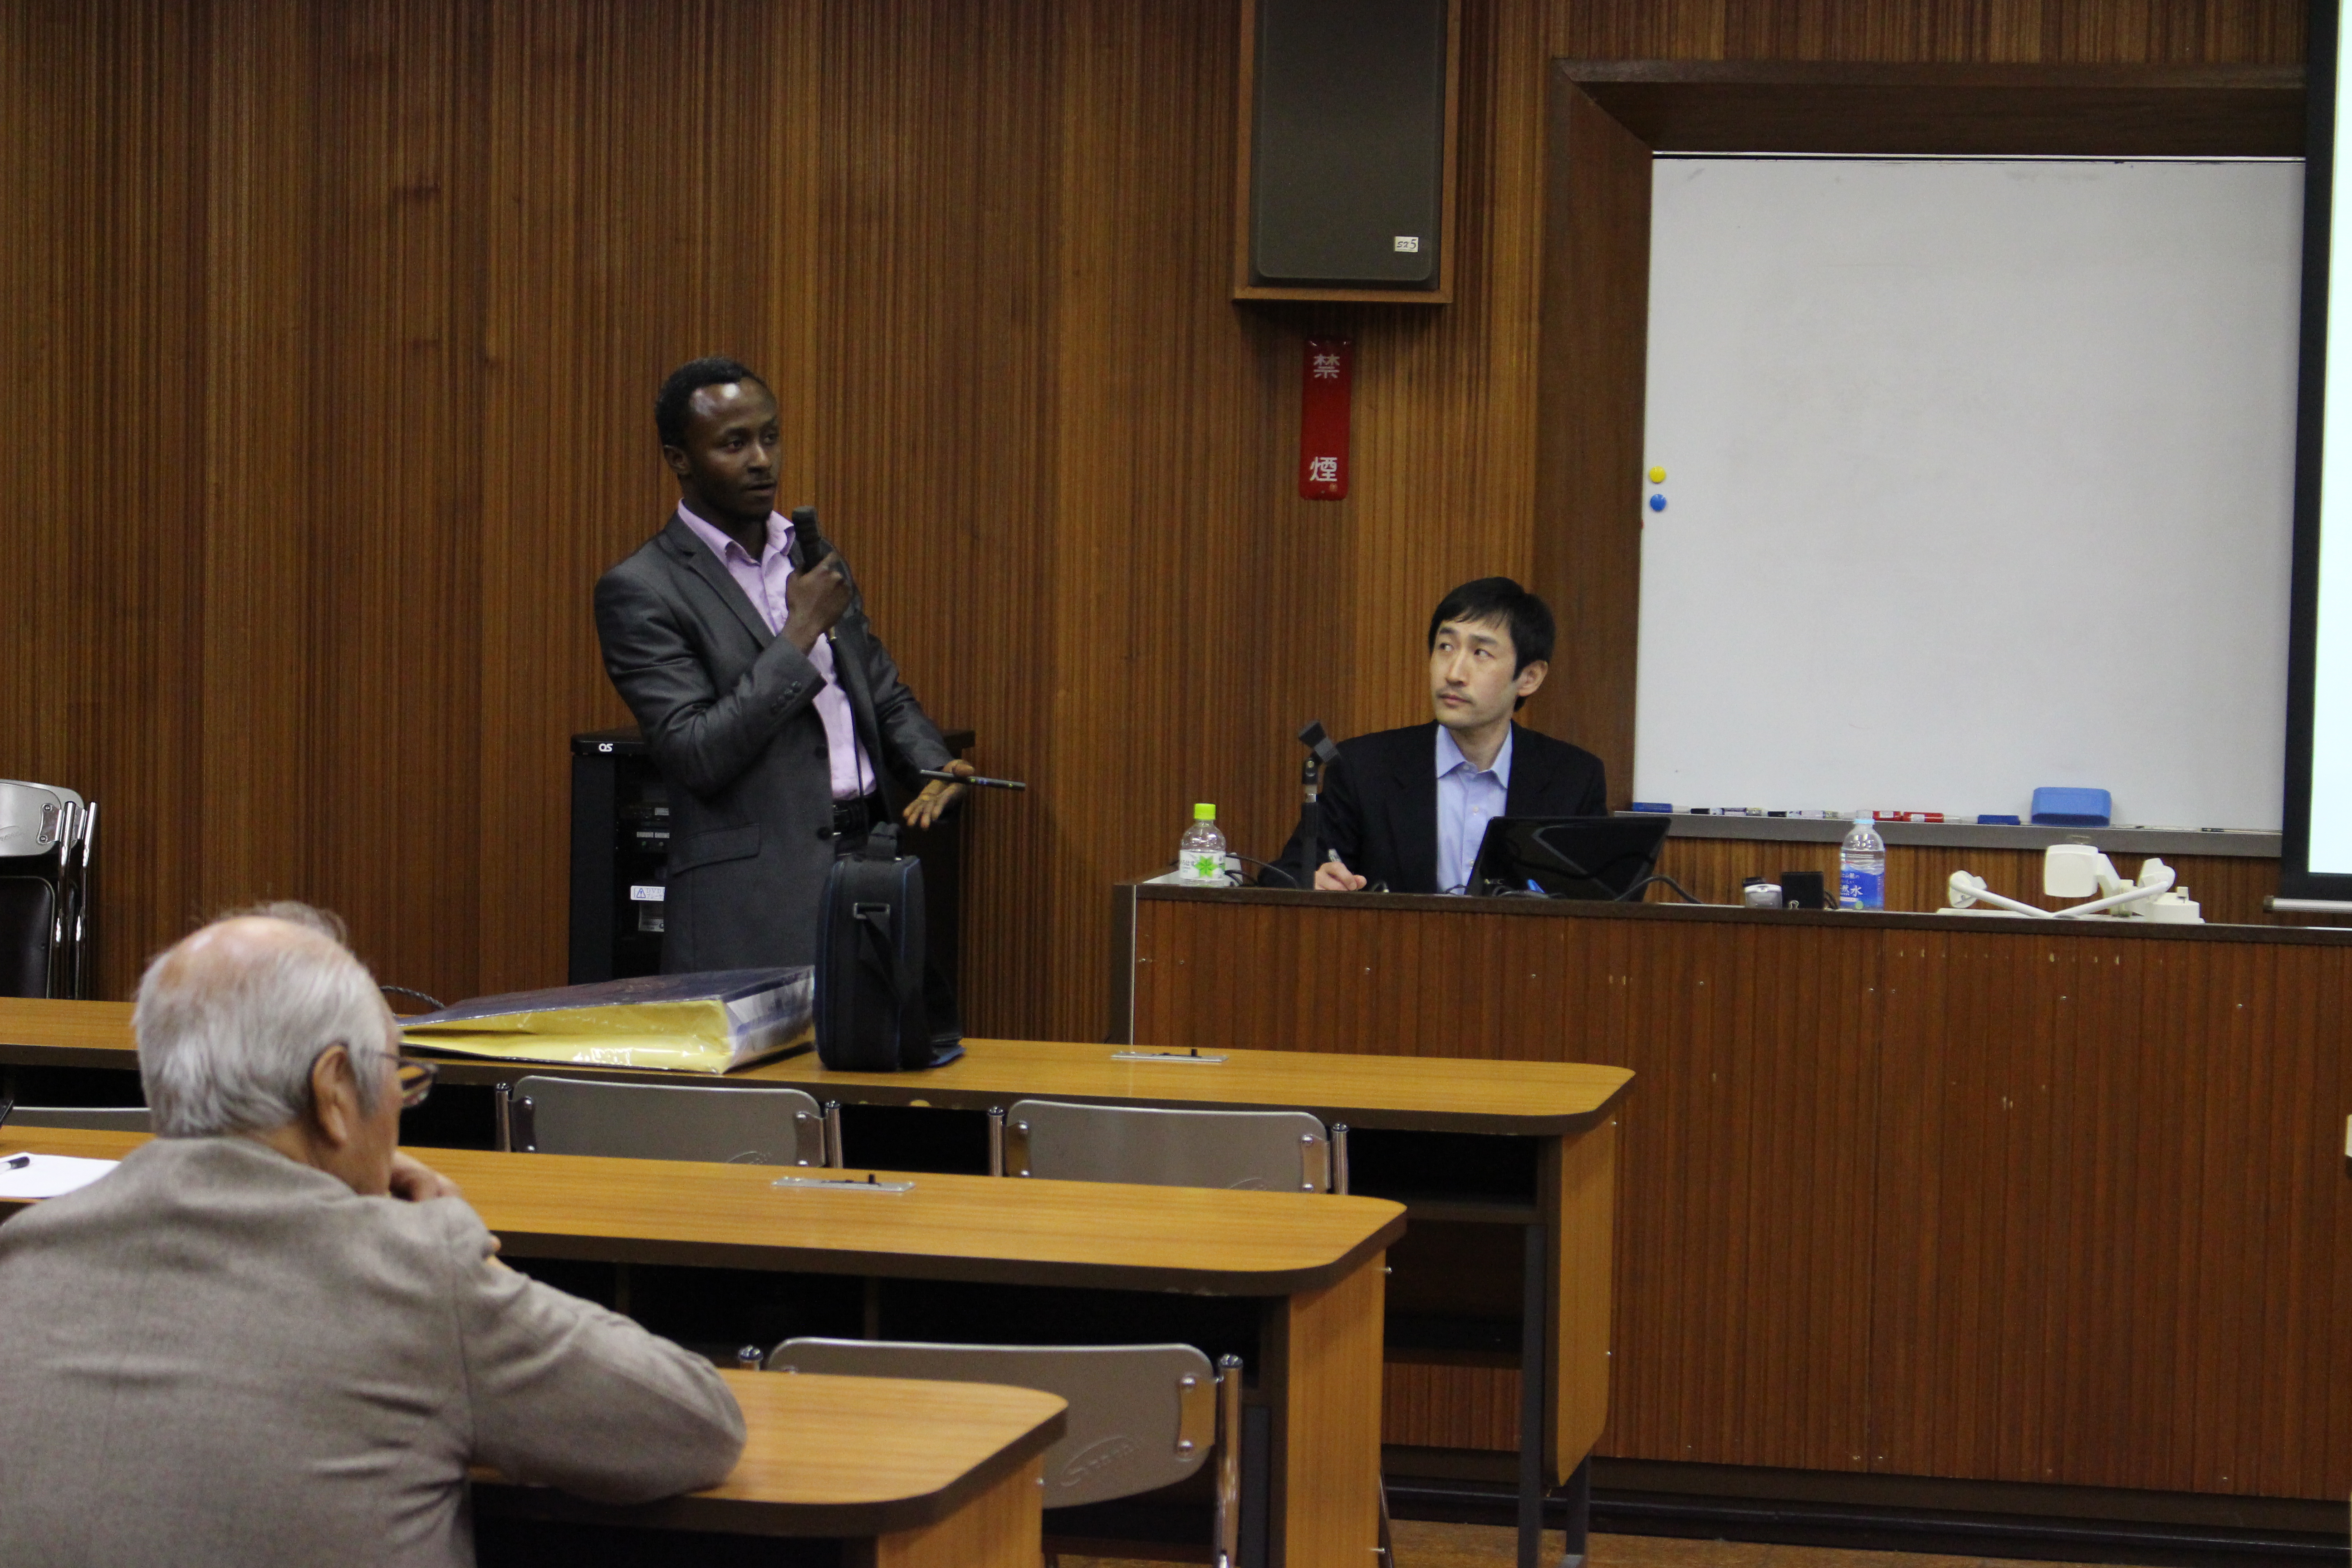 Presentation of preliminary findings at the Kyoto Prefectural University.